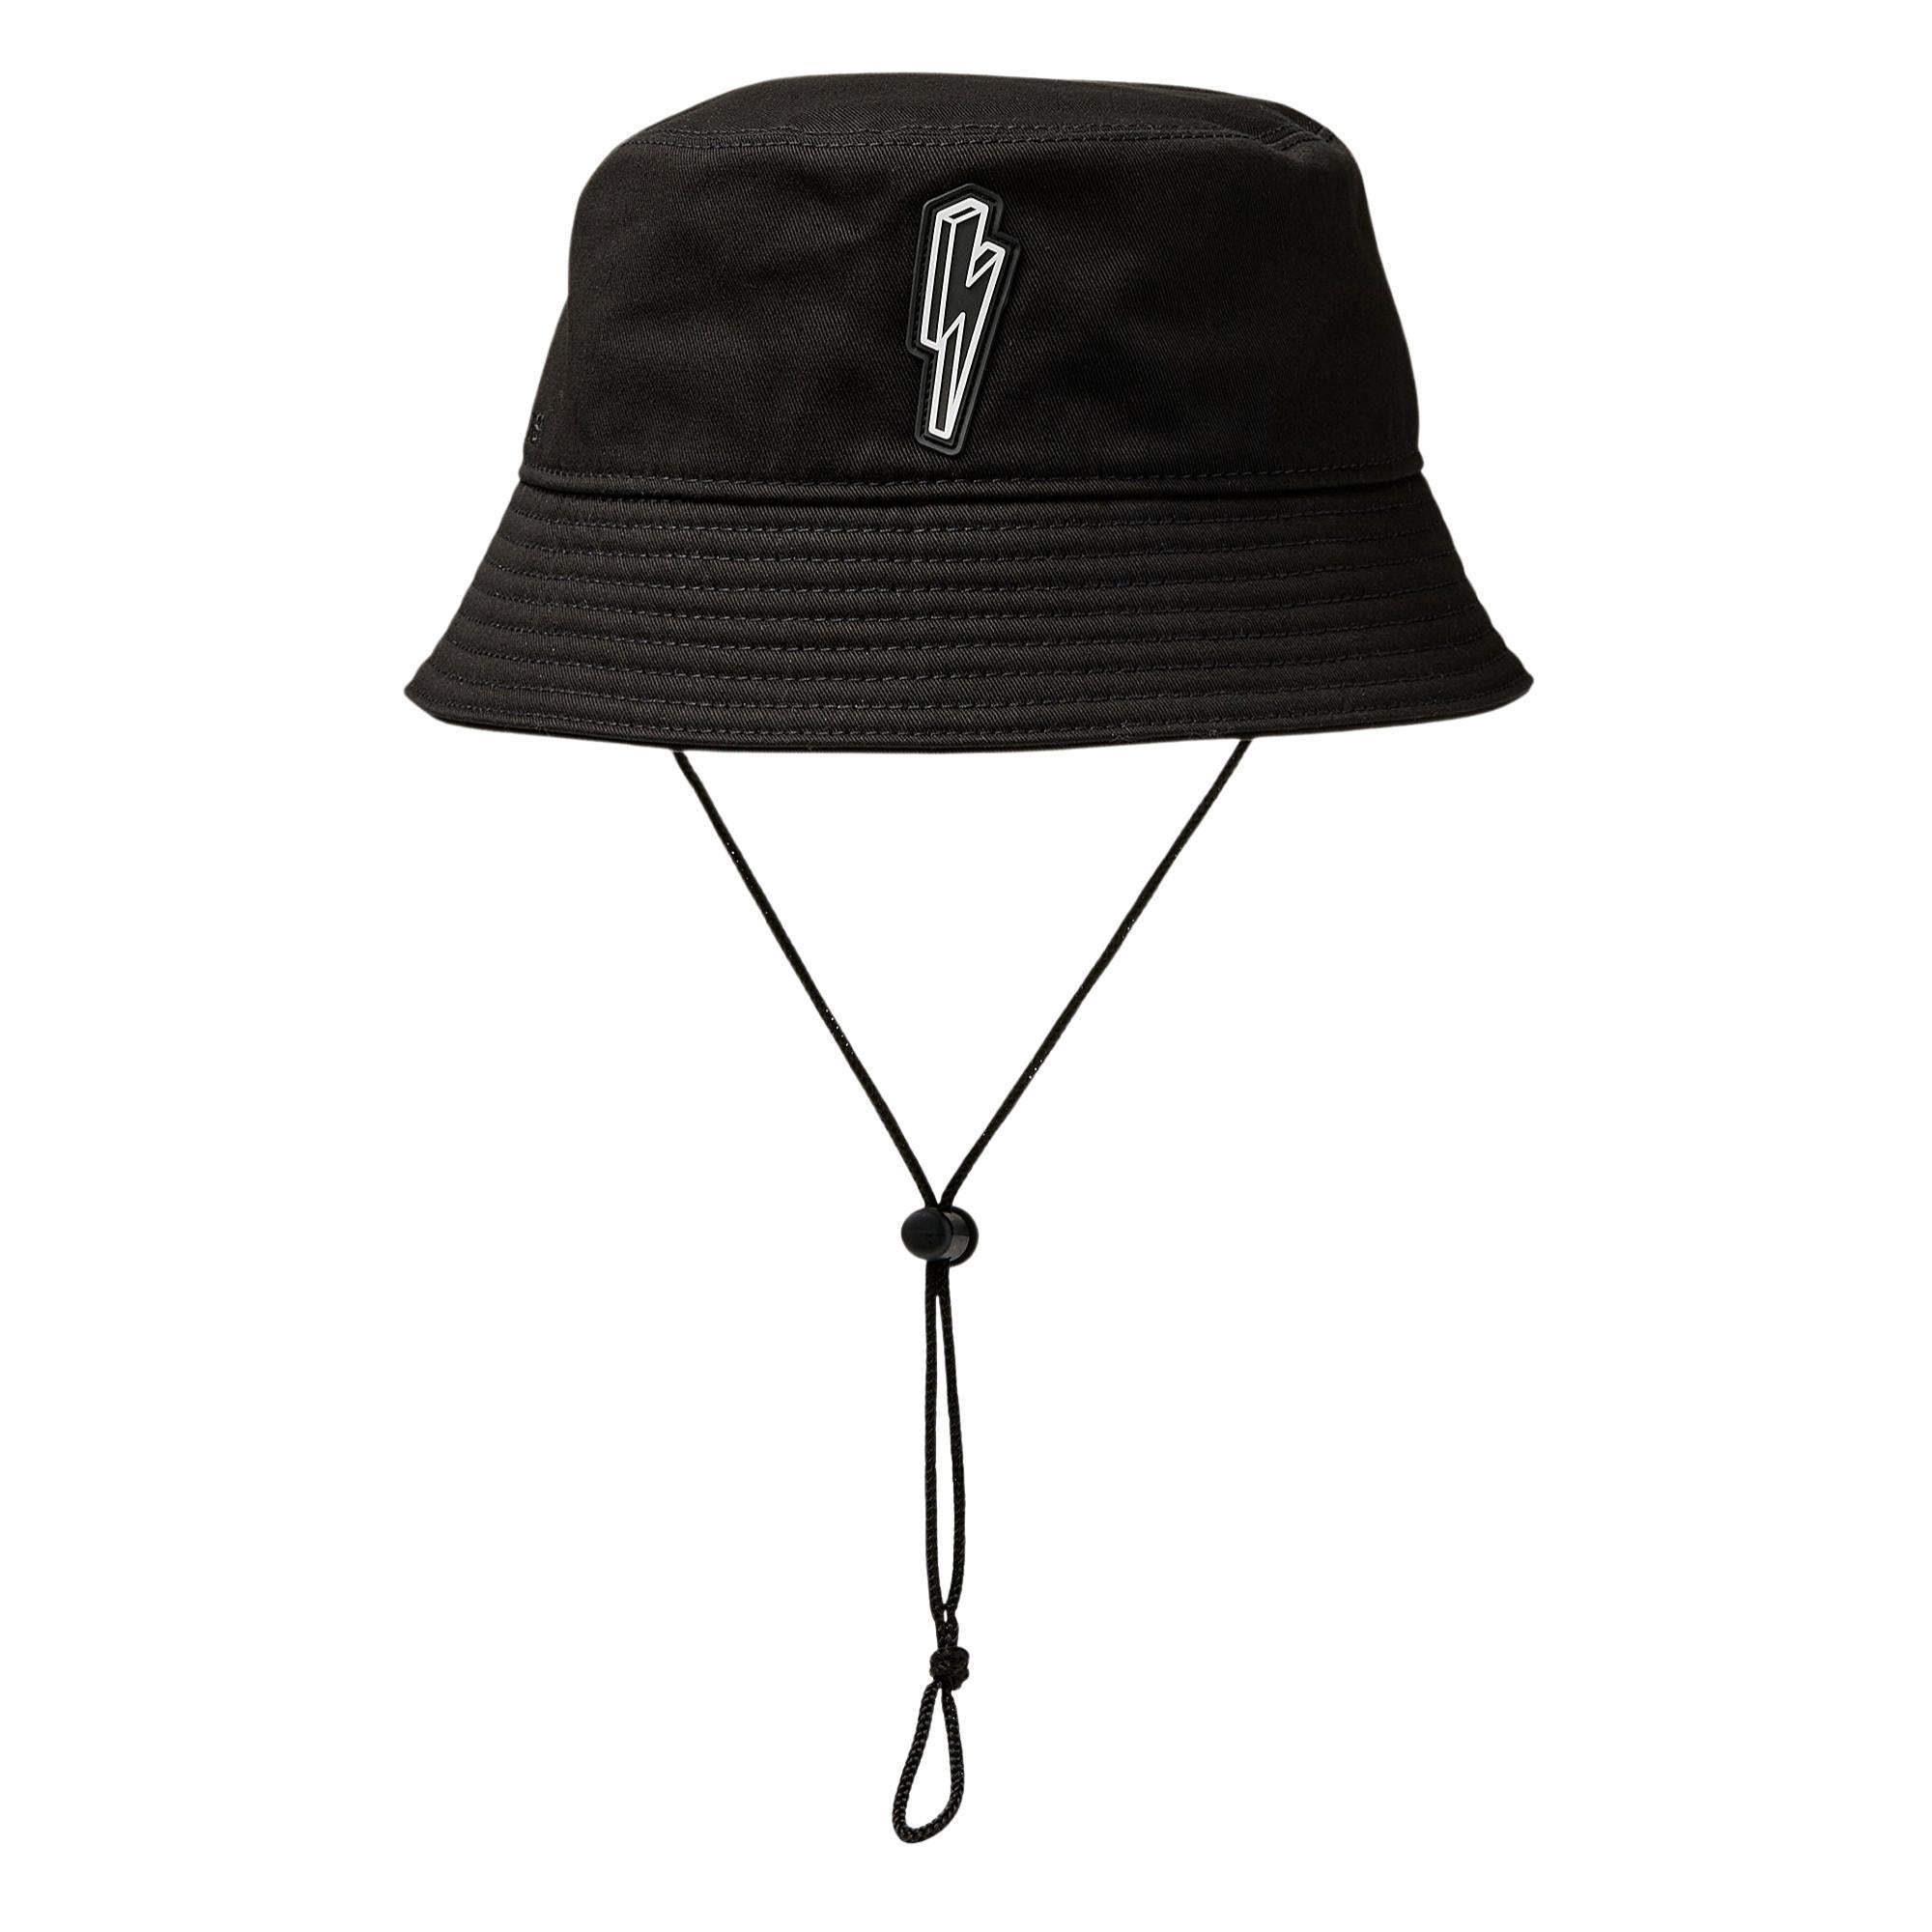 Neil Barrett's signature thunderbolt on this structured cotton canvas bucket hat. Get the British label's bold and unique take on this style that is making a strong comeback this season. Lightning bolt in a rubber-finished appliqué. Cotton hat.